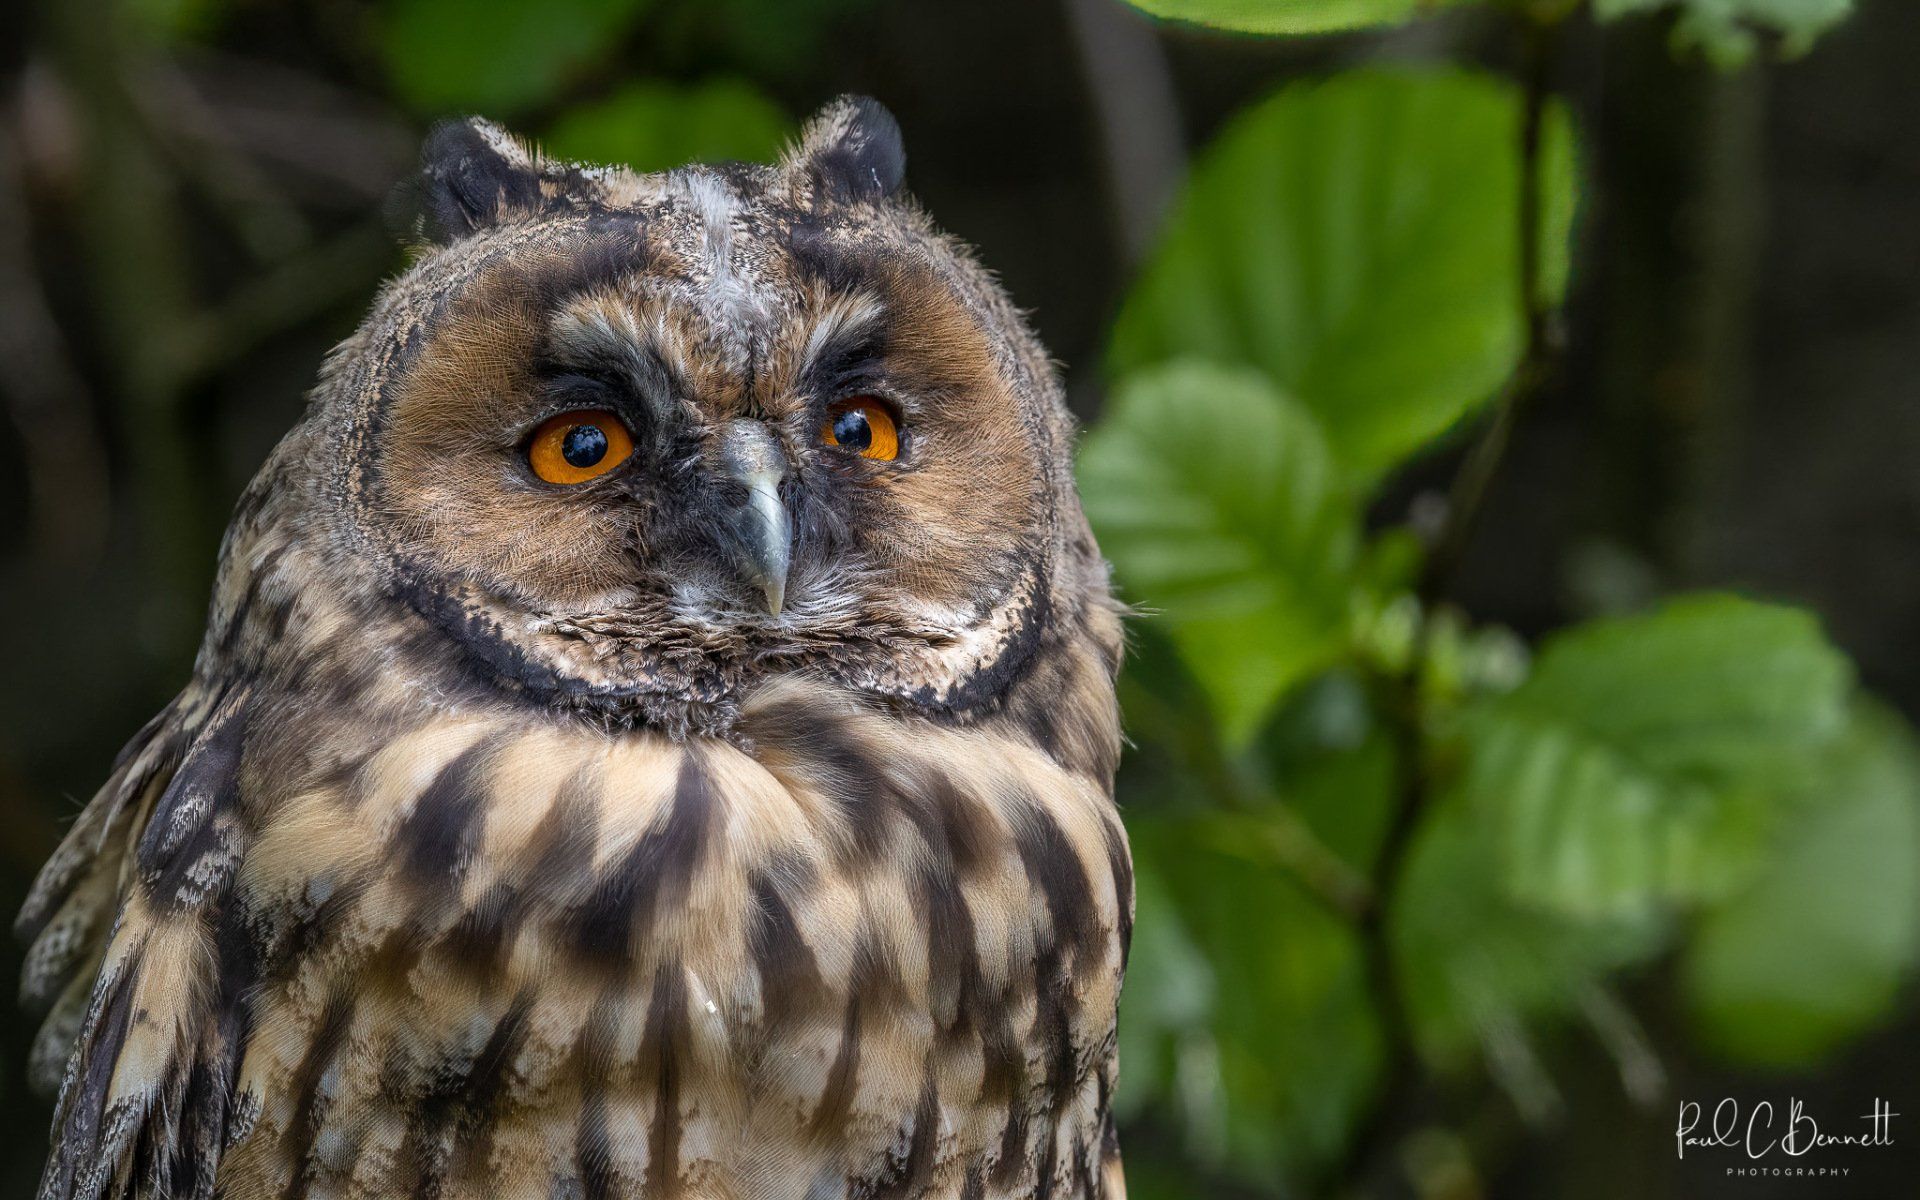 Images by Paul C Bennett Photography , Long Eared Owl Portrait, Long Eared Owl Close up, Leo.